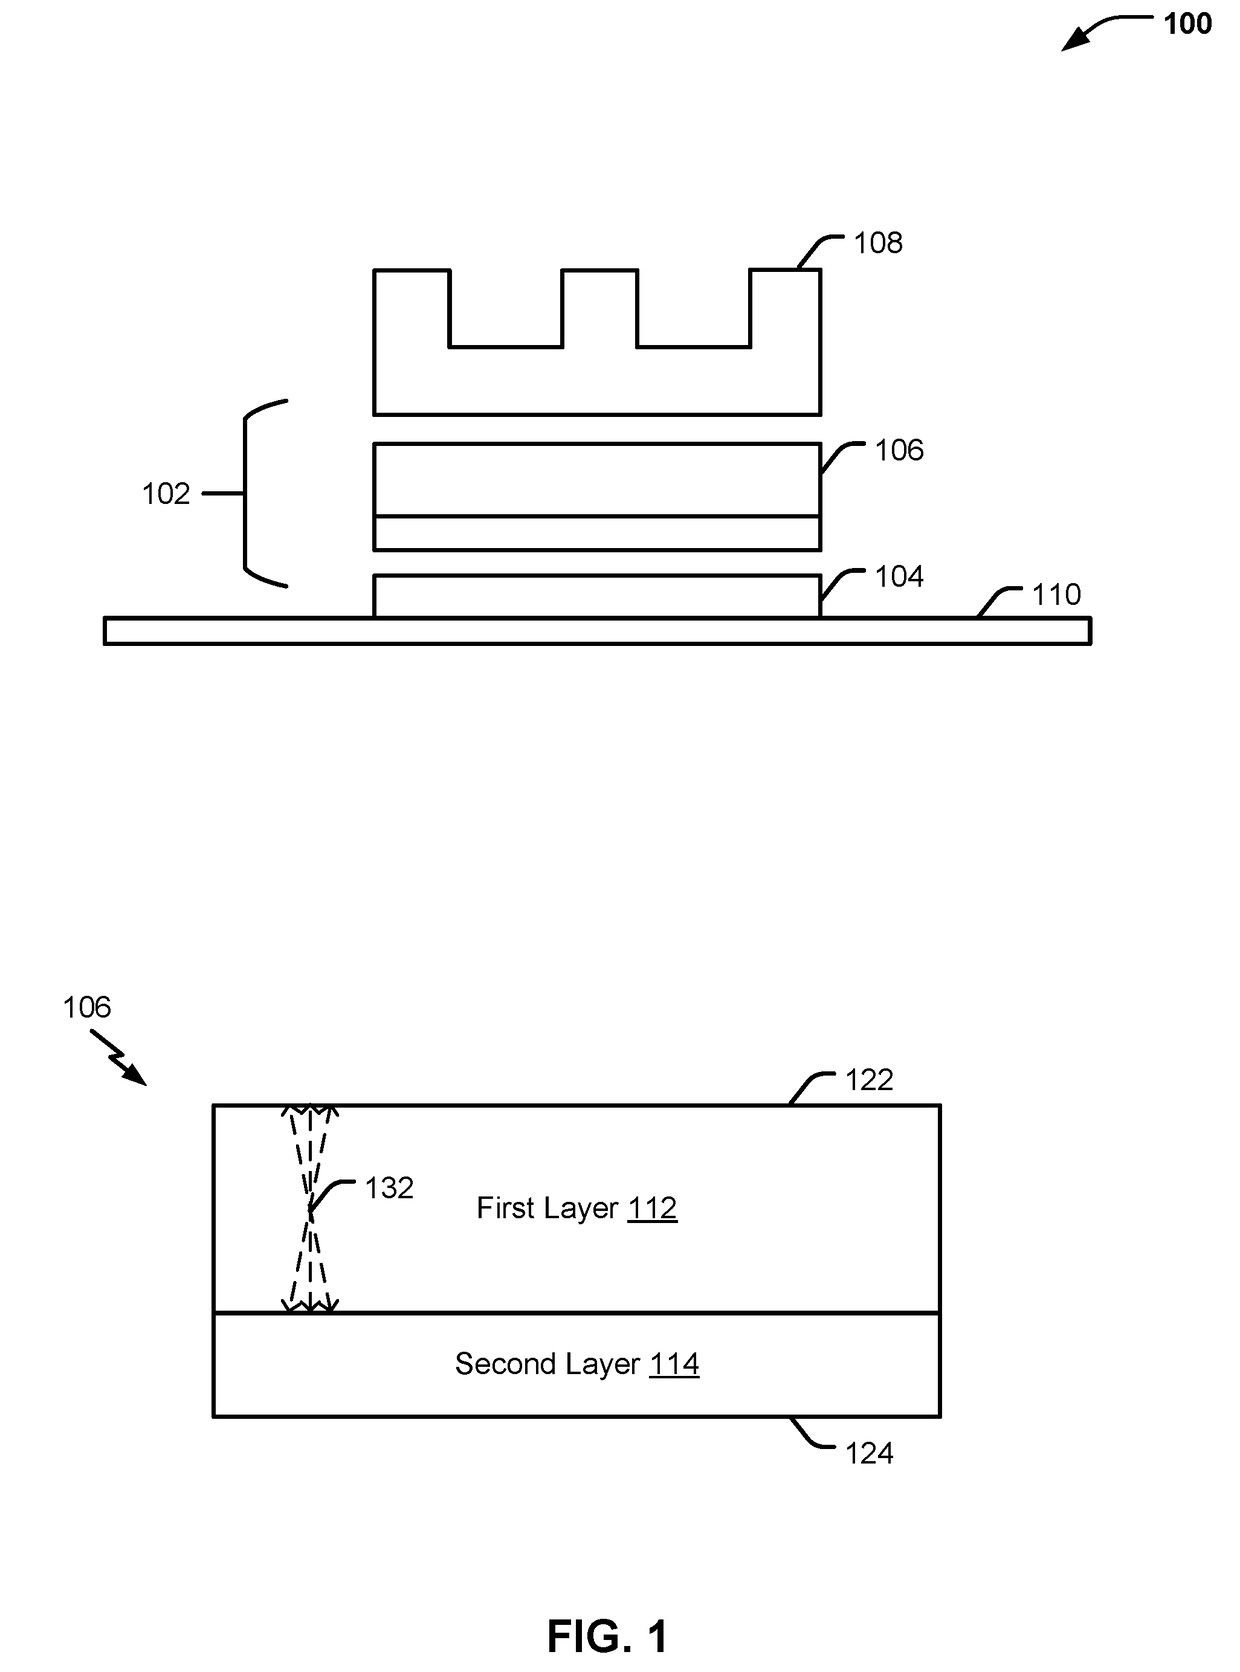 Composite thermal interface objects